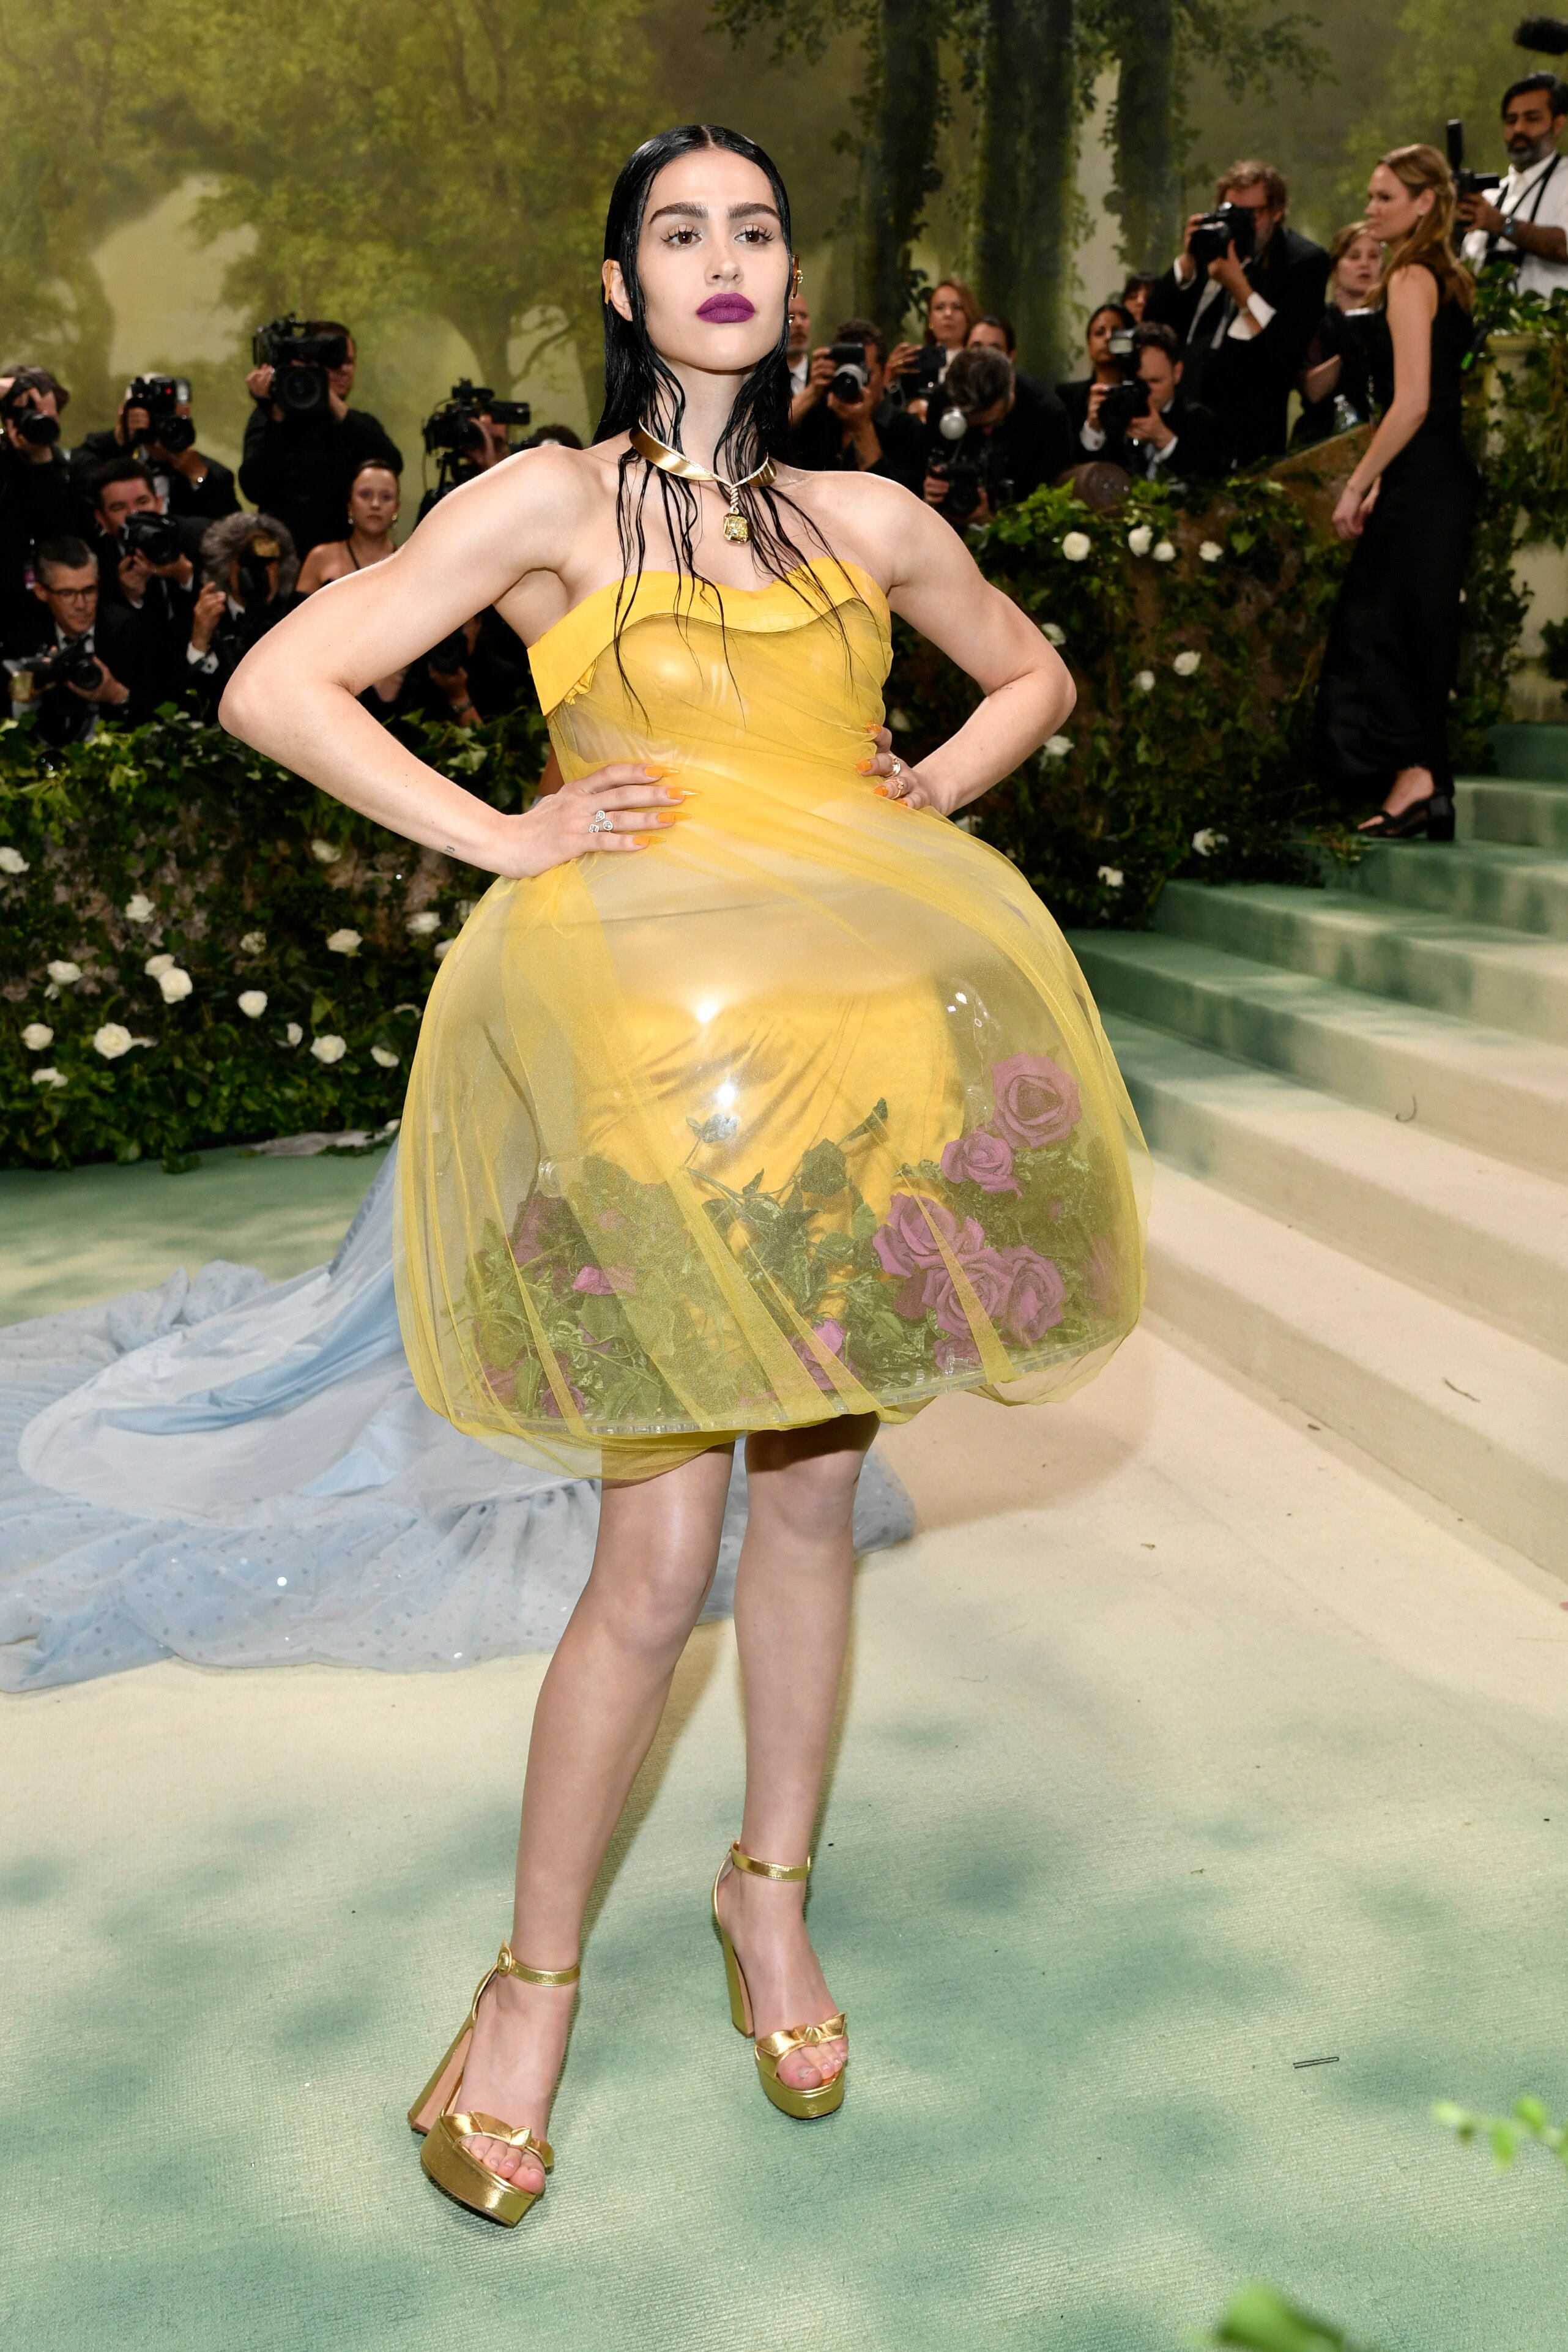 Amelia Gray wearing a yellow strapless mini dress, with the skirt being a glass bowl with pink roses in it